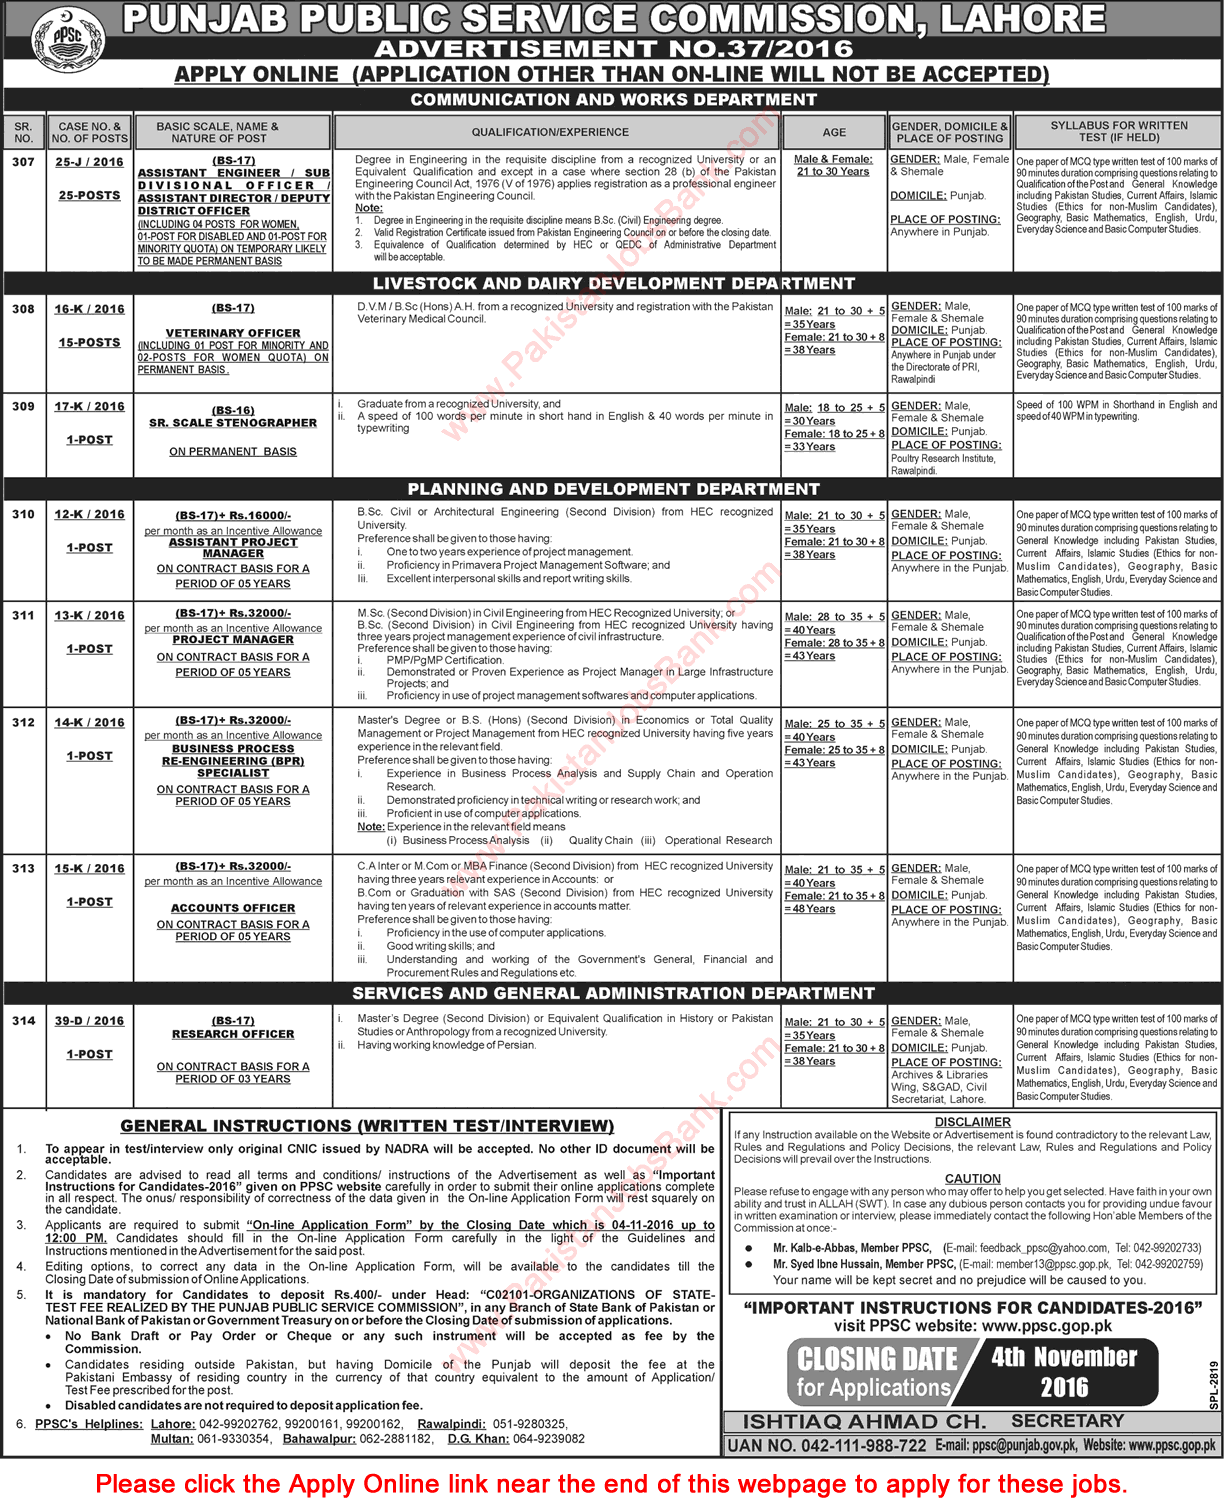 PPSC Jobs October 2016 Consolidated Advertisement No 37/2016 Apply Online Latest